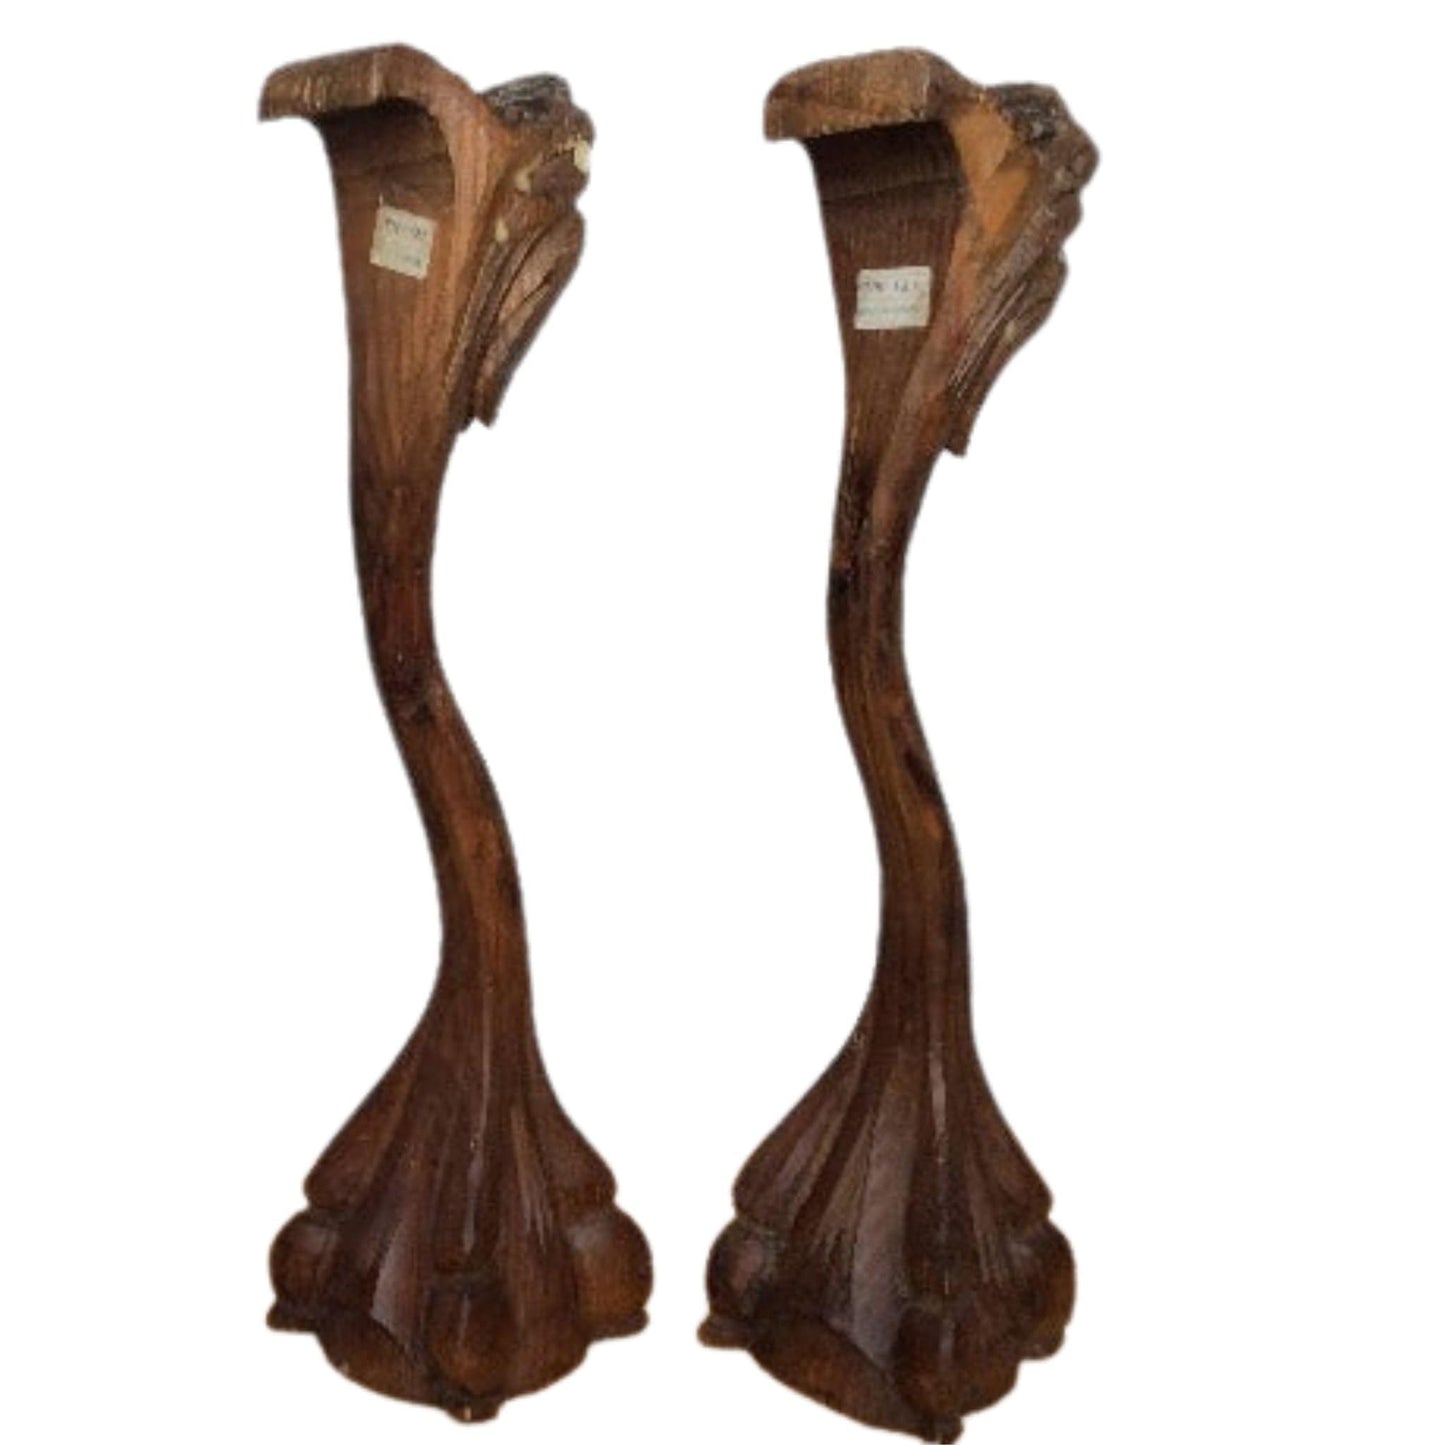 Claw Foot Candlesticks Brown / Wood / Vintage 1960s